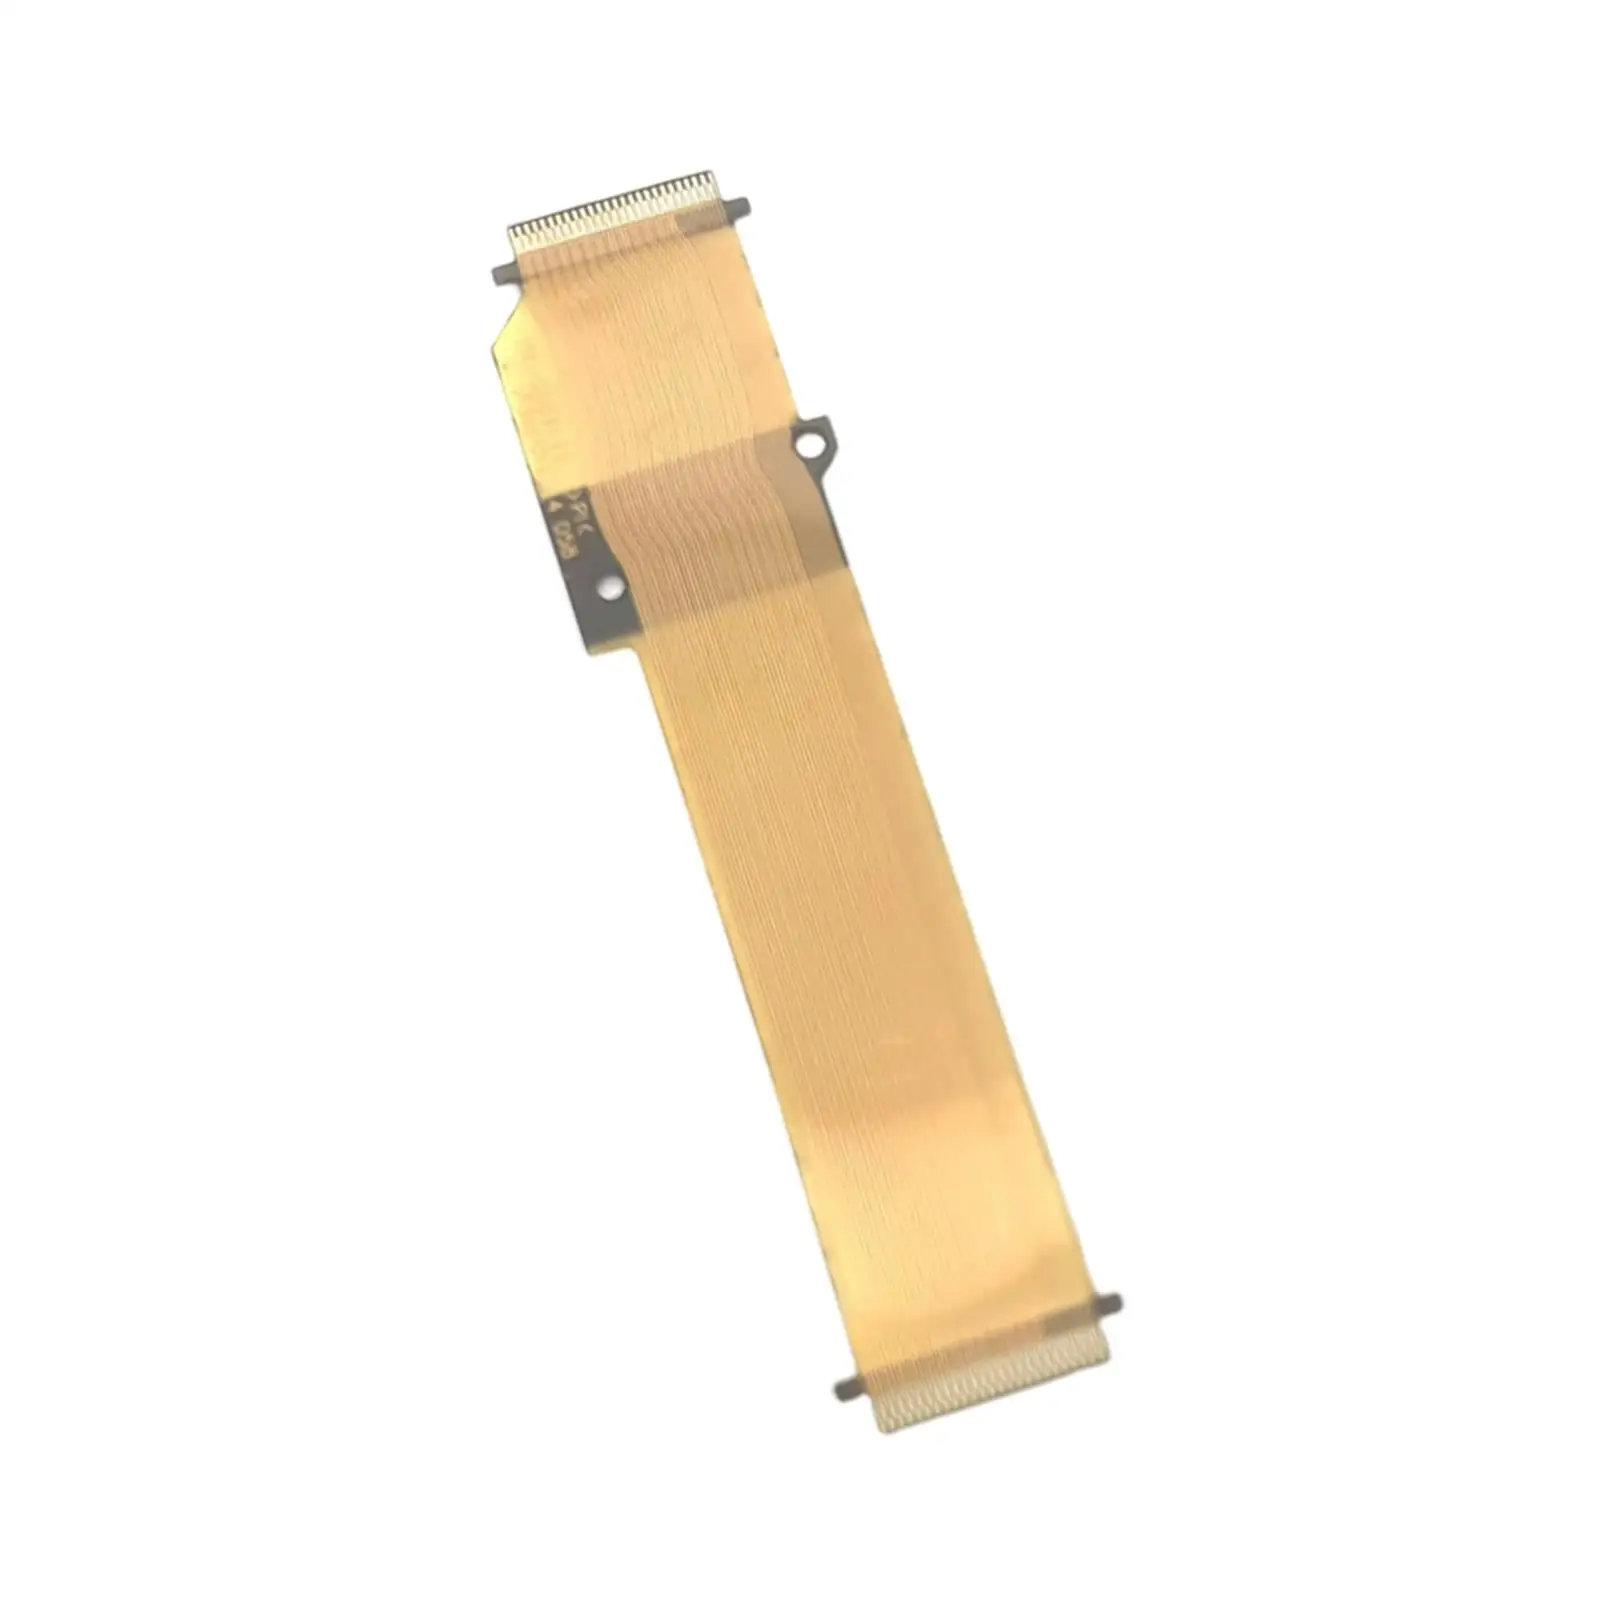 Sturdy Motherboard Connection Flex Cable CMOS Flex Cable Fpc Digital Camera for A7S2 Parts Fittings Replaces Accessory